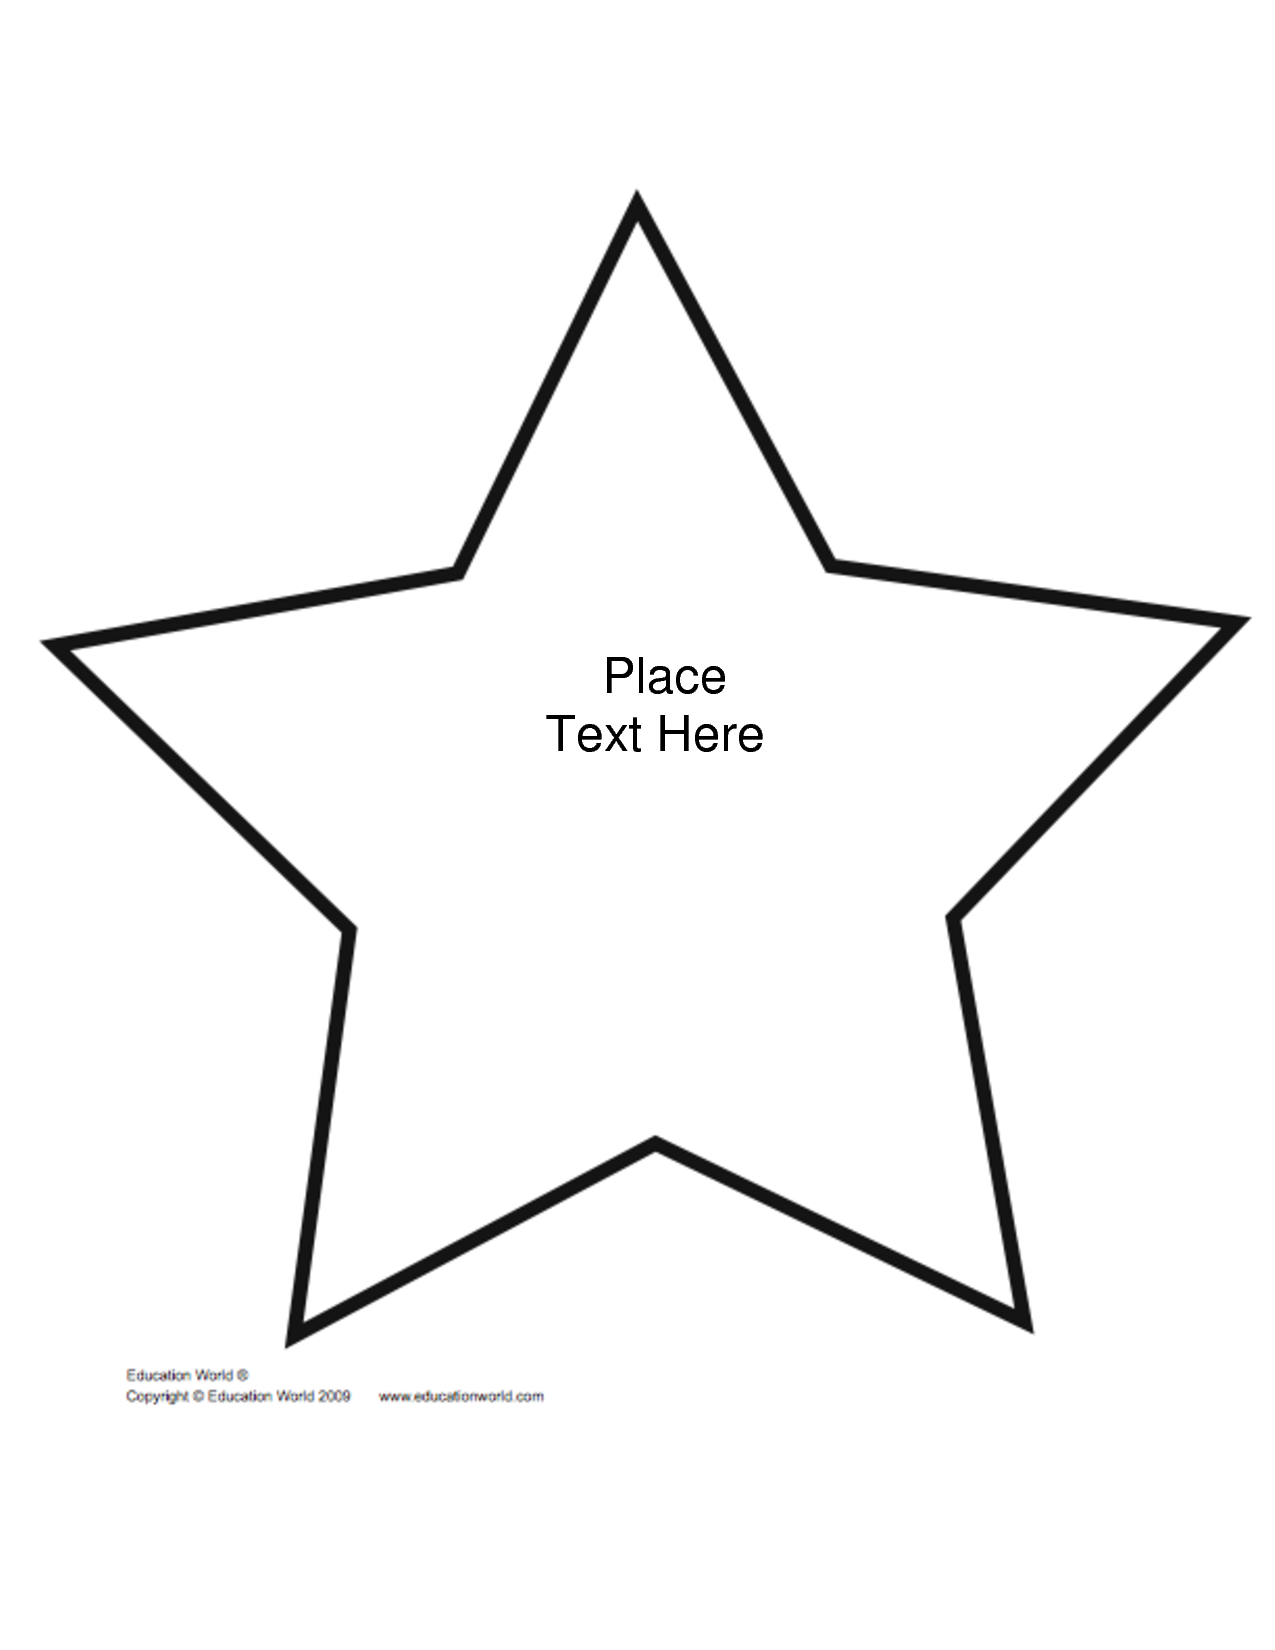 Best Photos of Star Templates To Print - Large Star Template ...